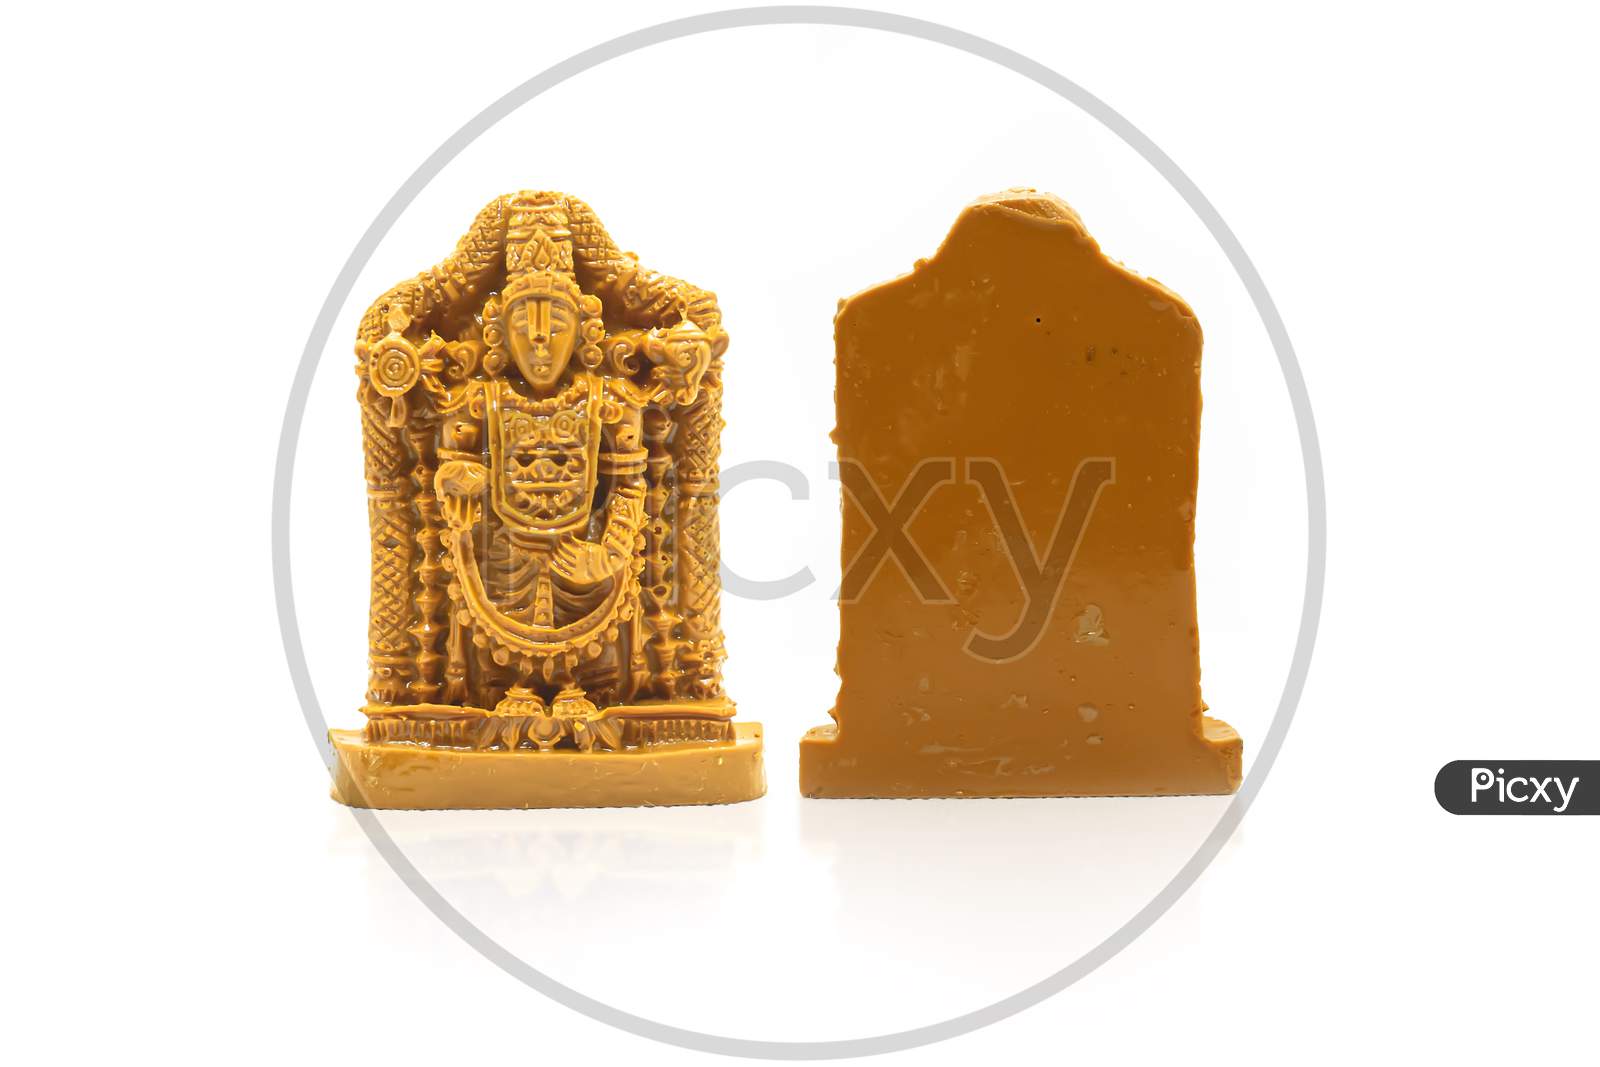 The Statue Of Venkateswara Swamy Carved In Brown Wood Is Insulated With White Reflection On The Front And Back.